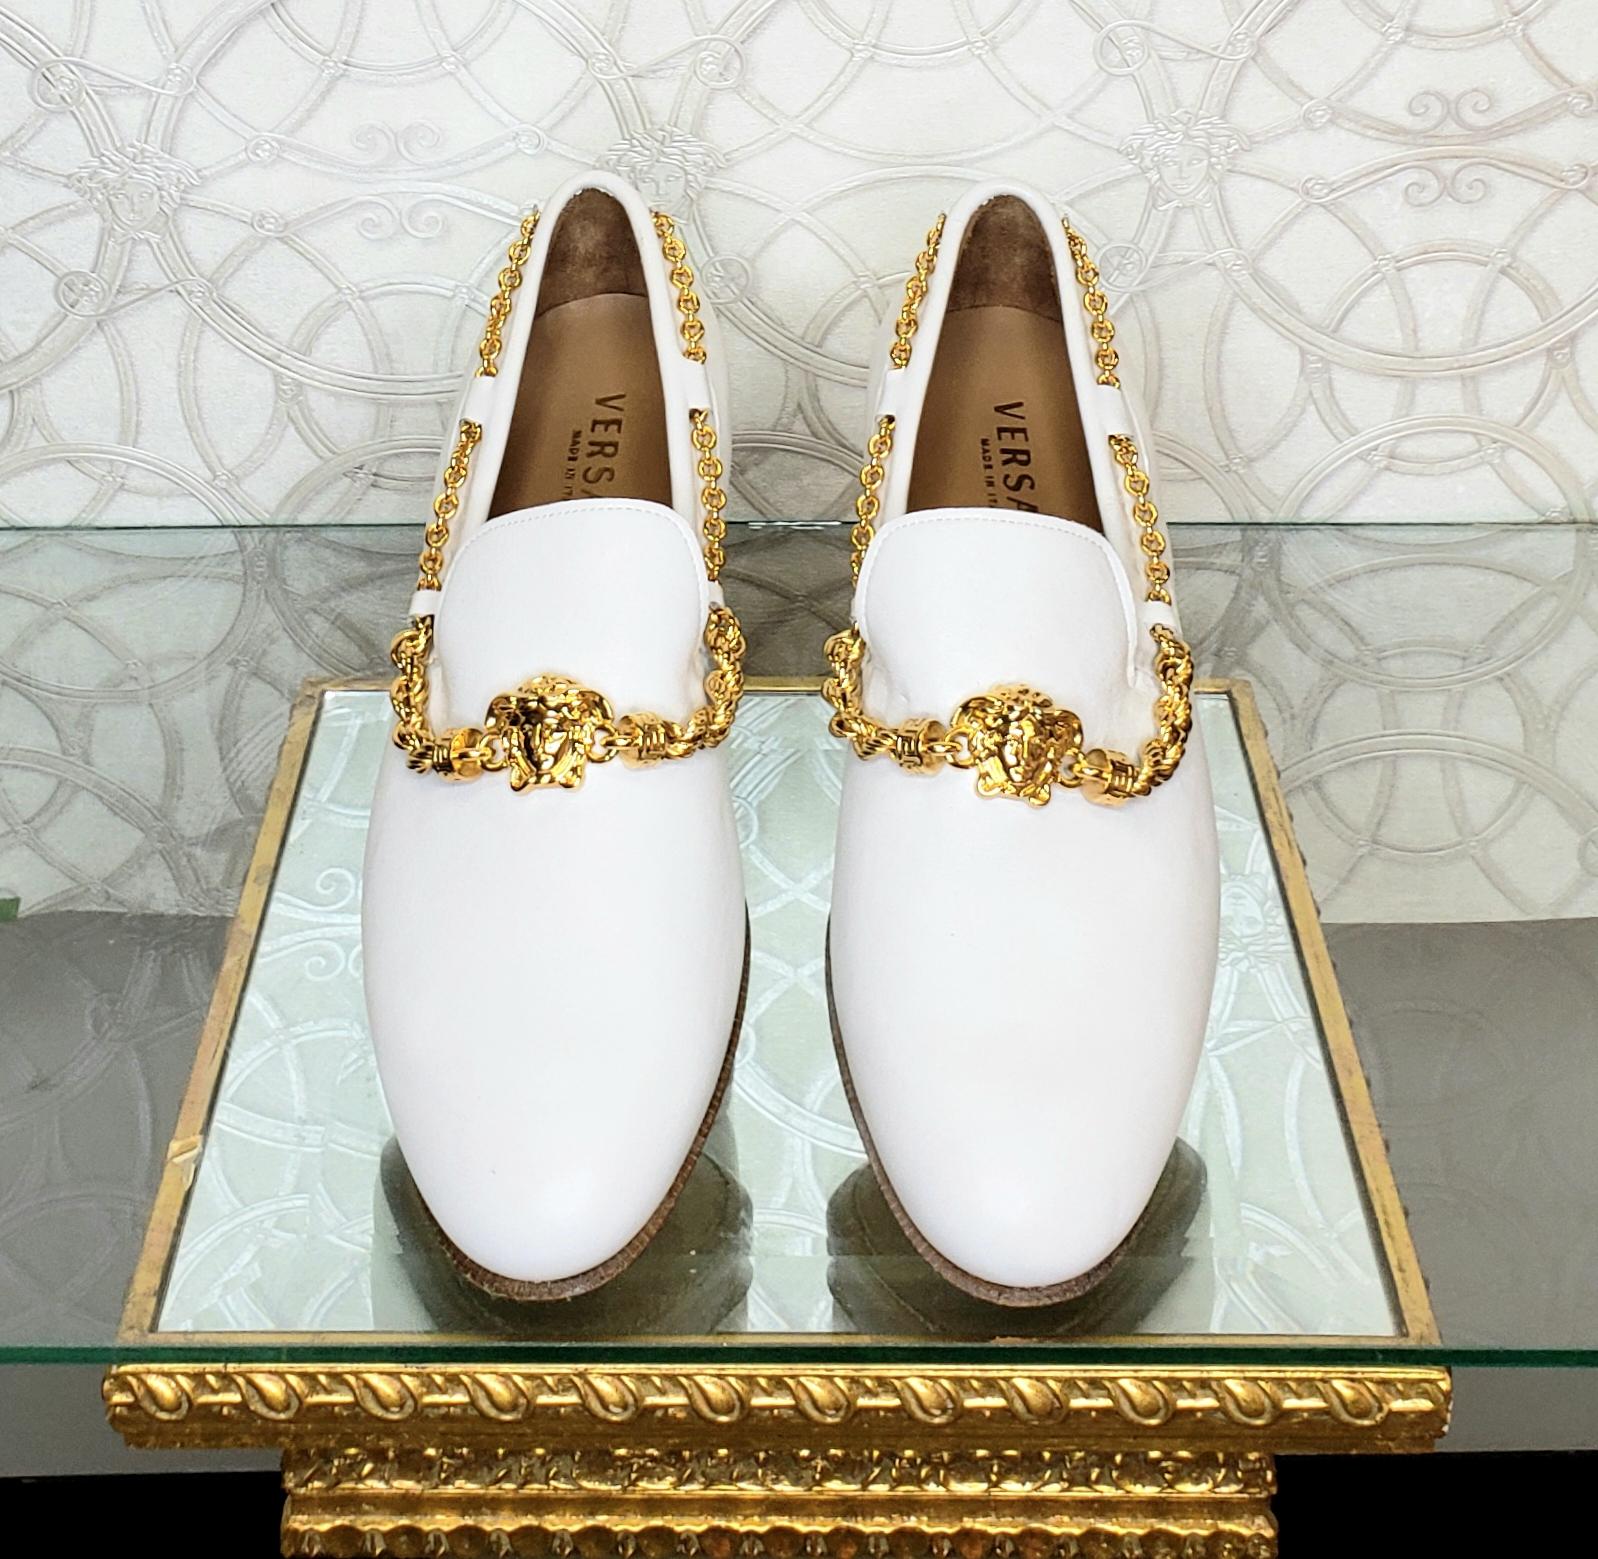 Gray SS 2015 VERSACE WHITE LEATHER LOAFER SHOES w/ GOLD PLATED HARDWARE Size 44 - 11